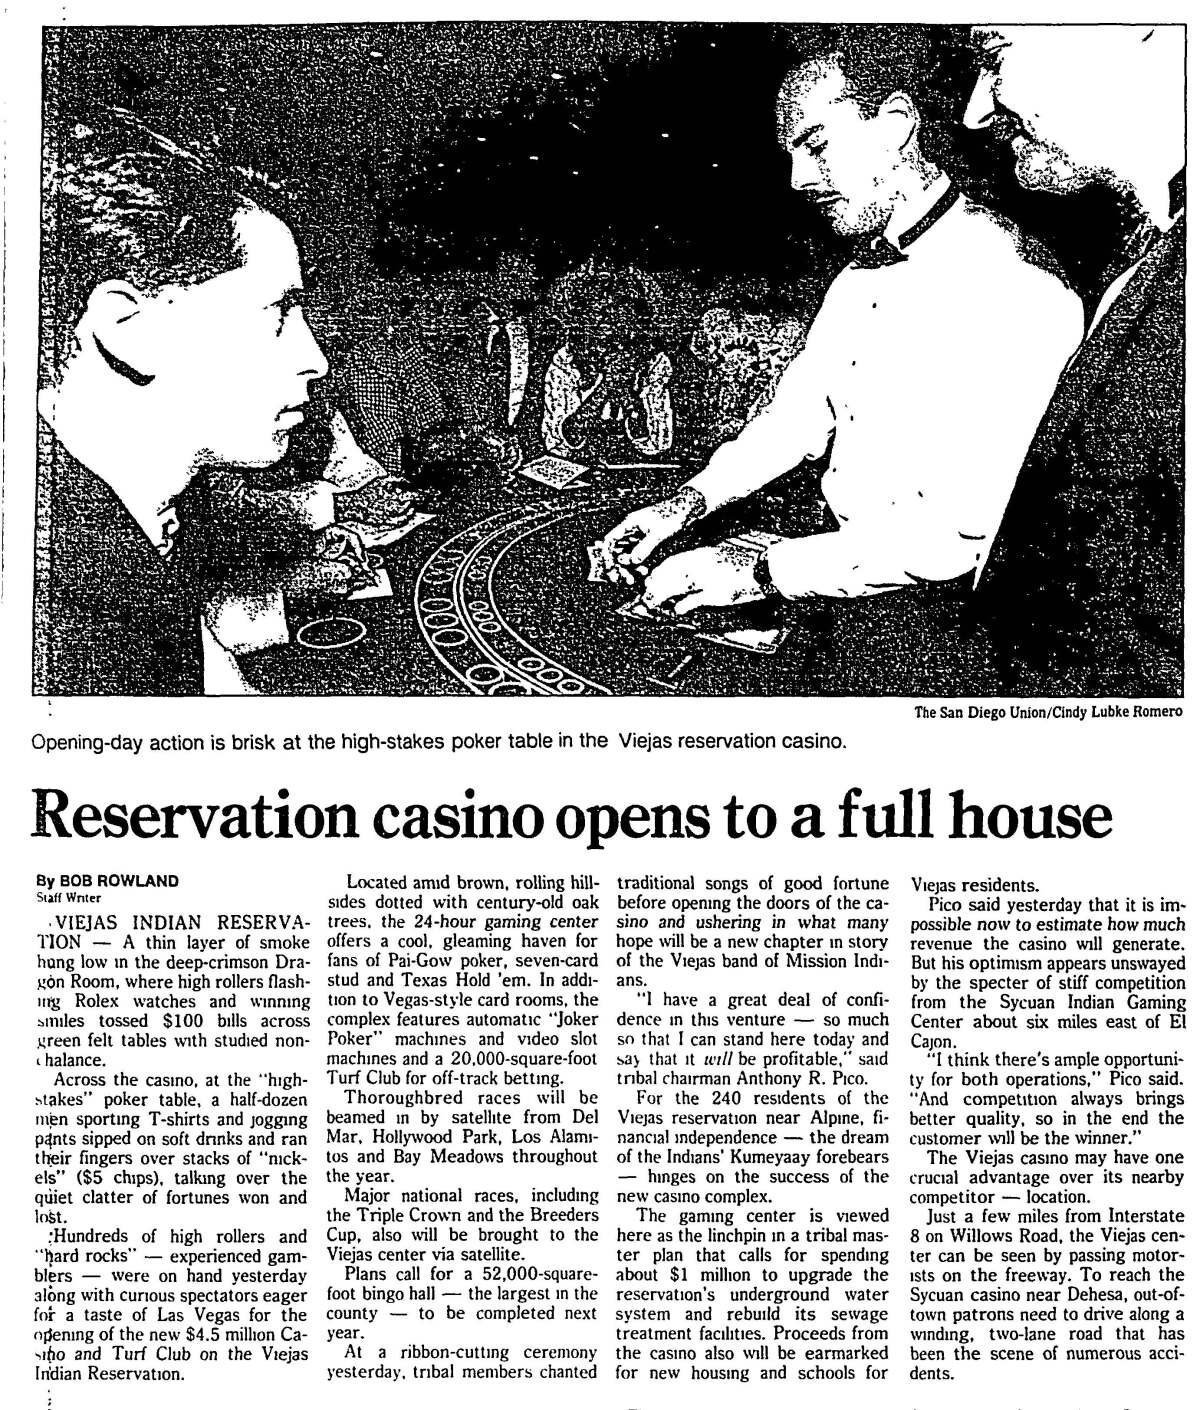 "Reservation casino opens to a full house" article published in The San Diego Union-Tribune Sept. 14, 1991.